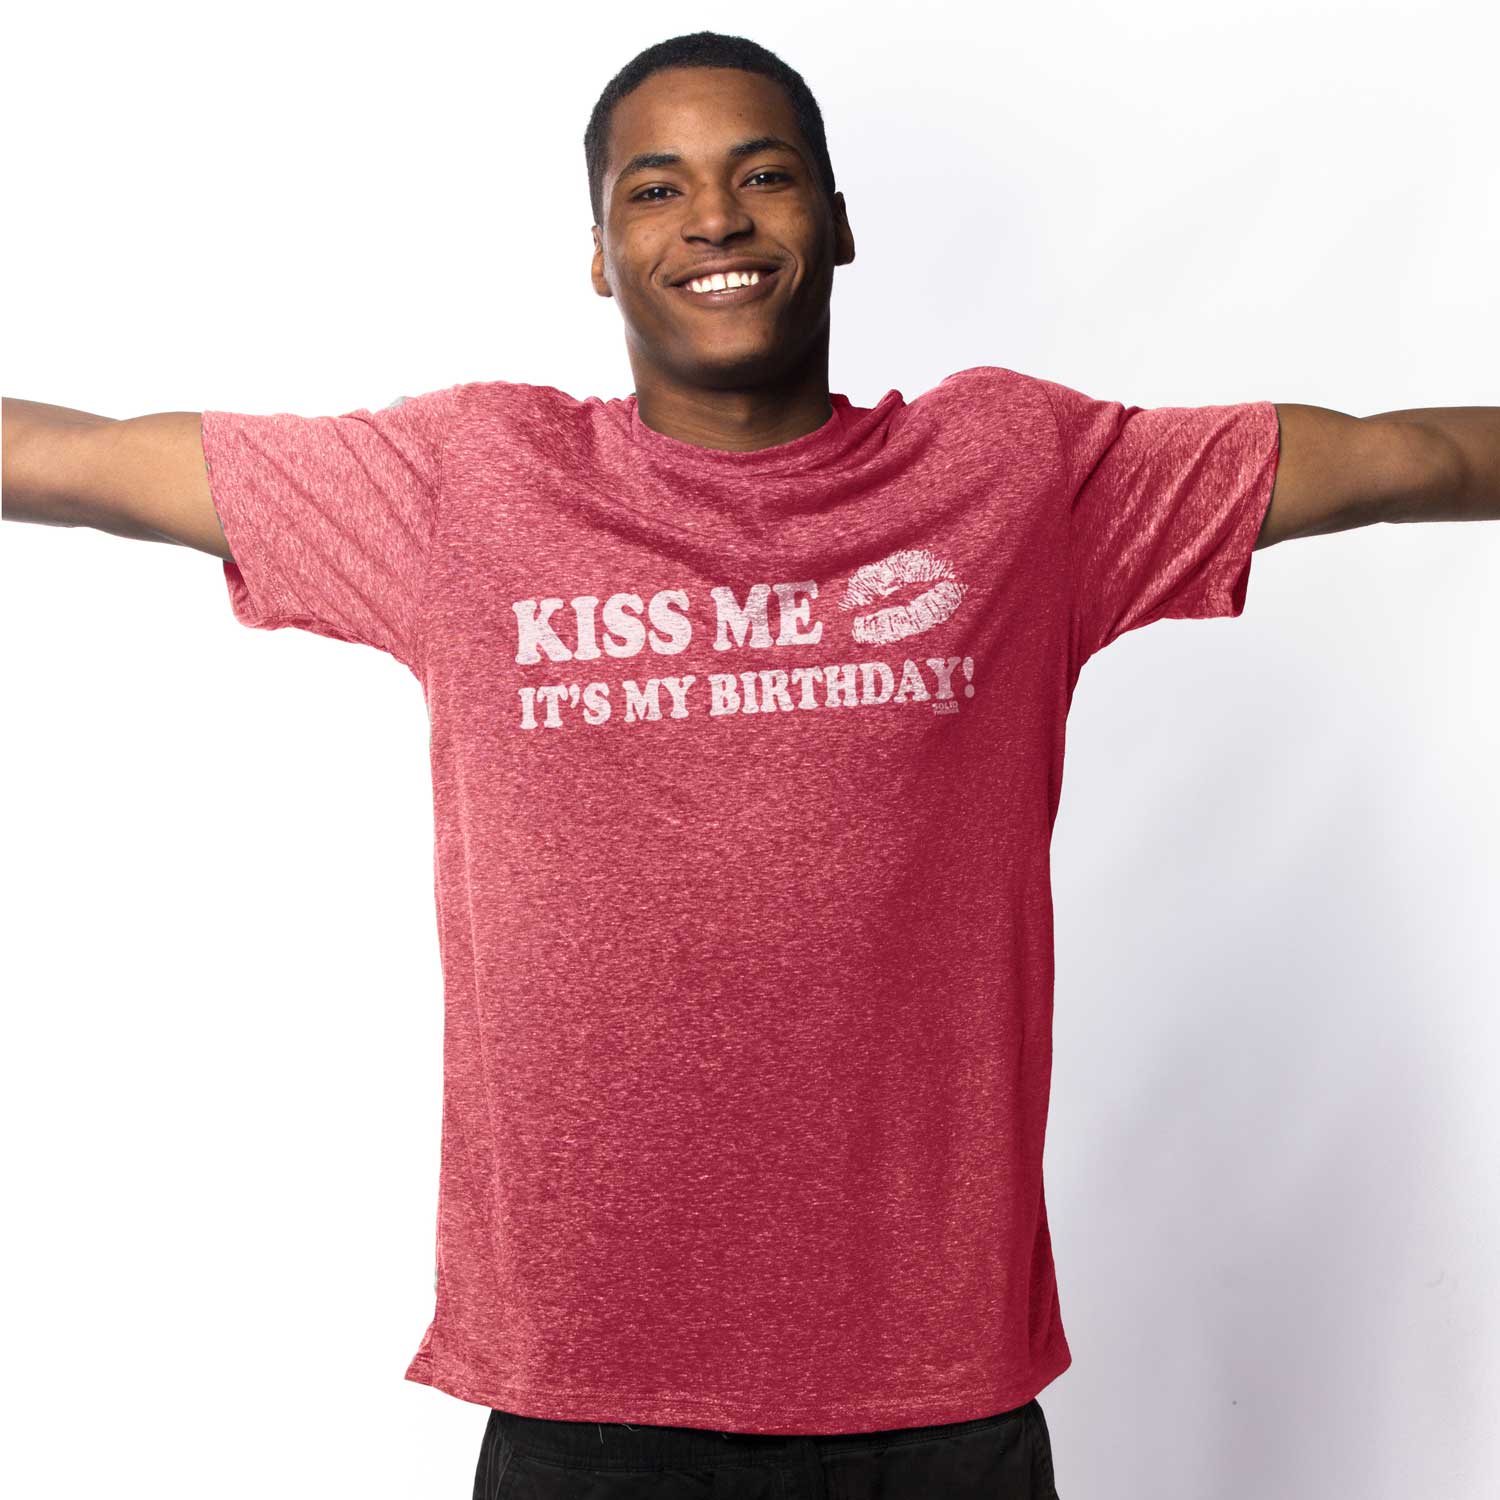 Men's Kiss Me It's My Birthday Cool Graphic T-Shirt | Funny Party Tee on Model | Solid Threads